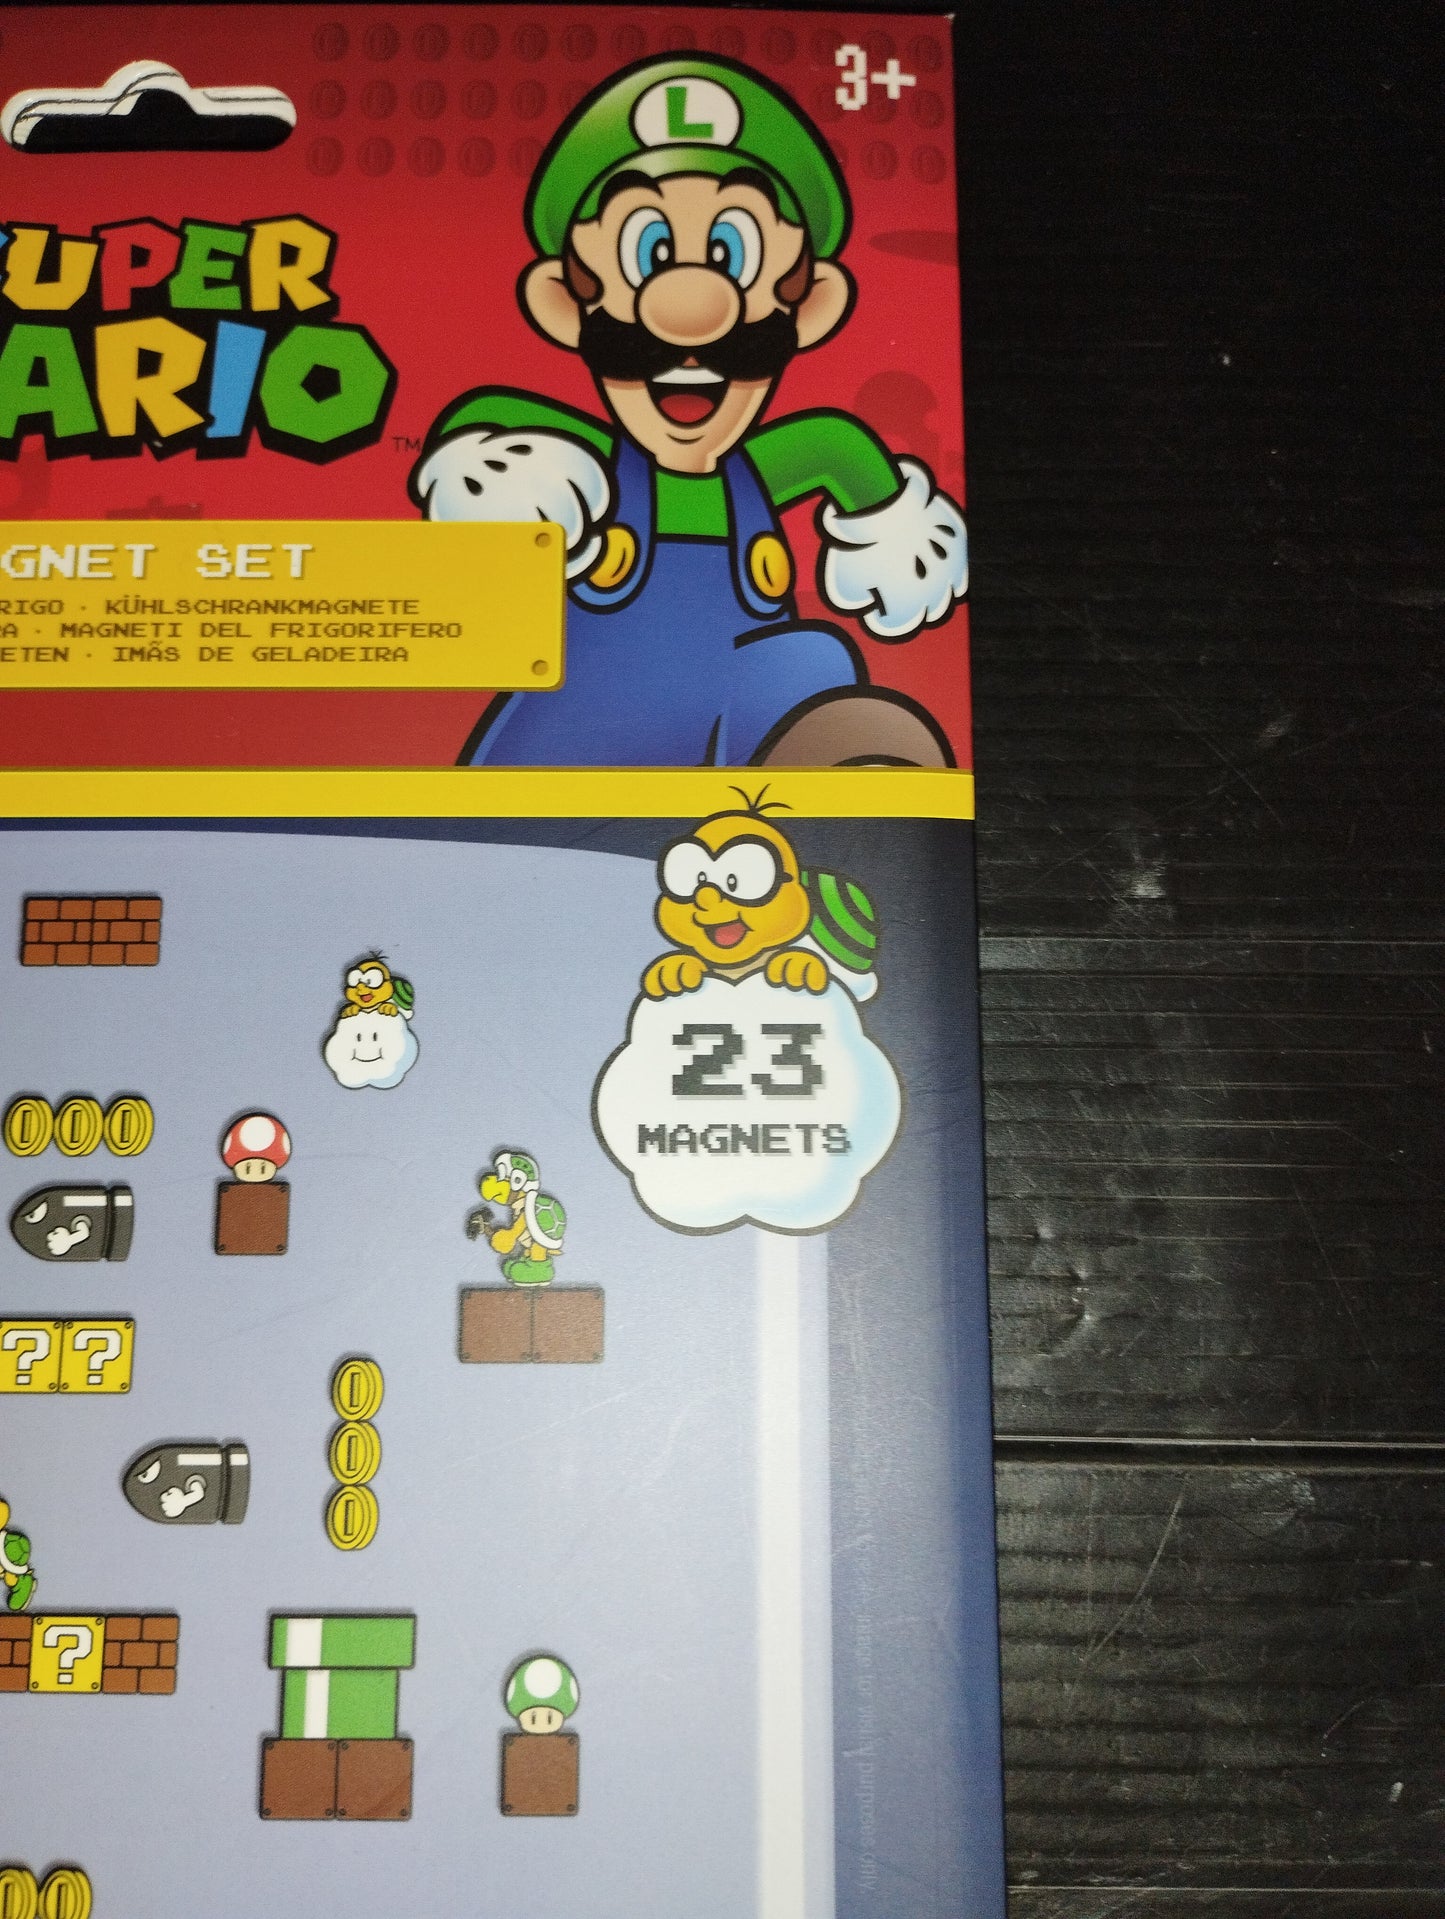 Super Mario 23 magnets set

Official Nintendo Licensed Product